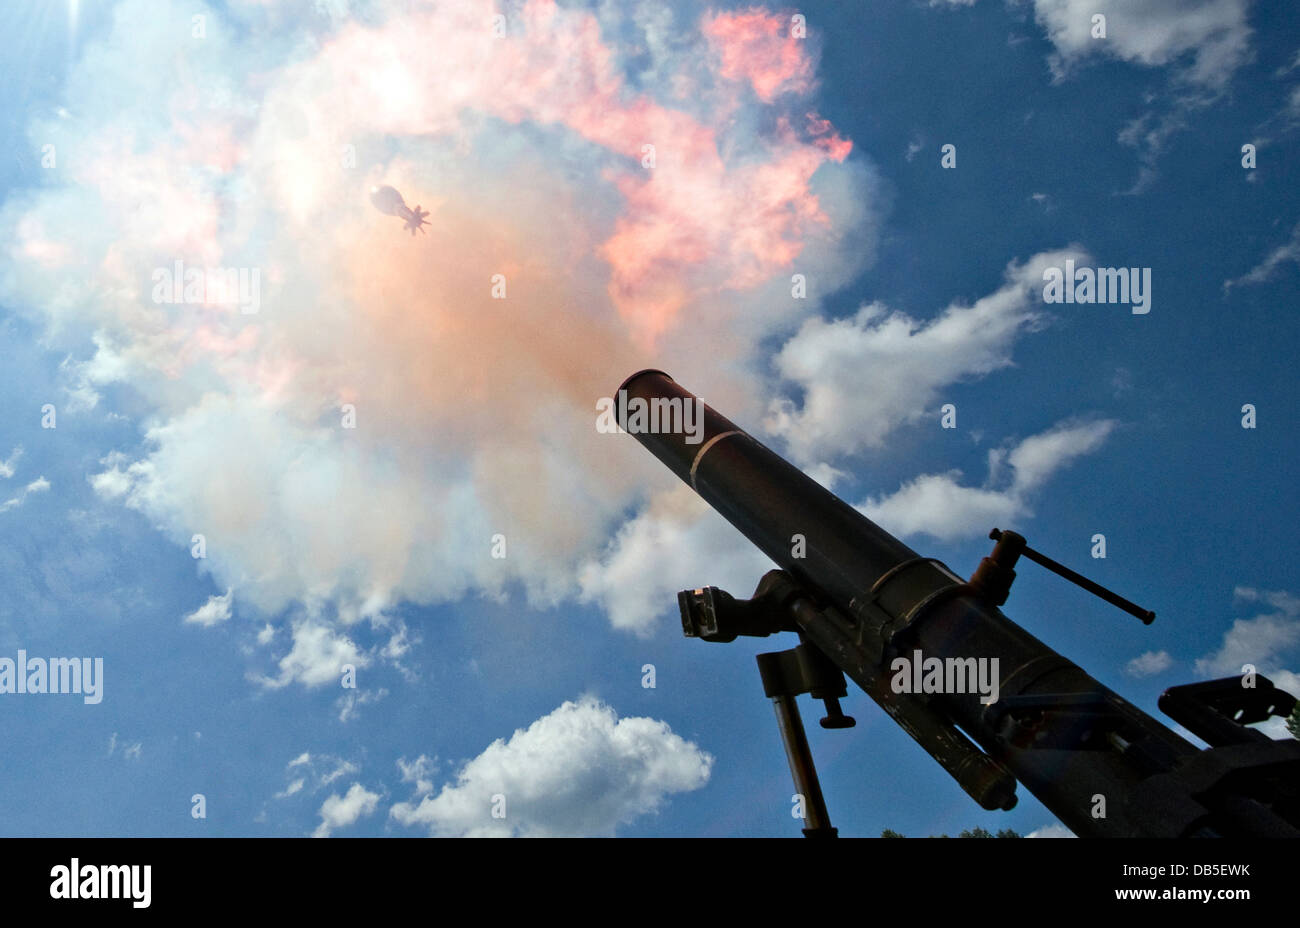 A 120mm mortar leaves the tube, fired by Soldiers of Headquarters Company July 13, 2013 at Atterbury-Muscatatuck, near Edinburgh, Indiana. Stock Photo